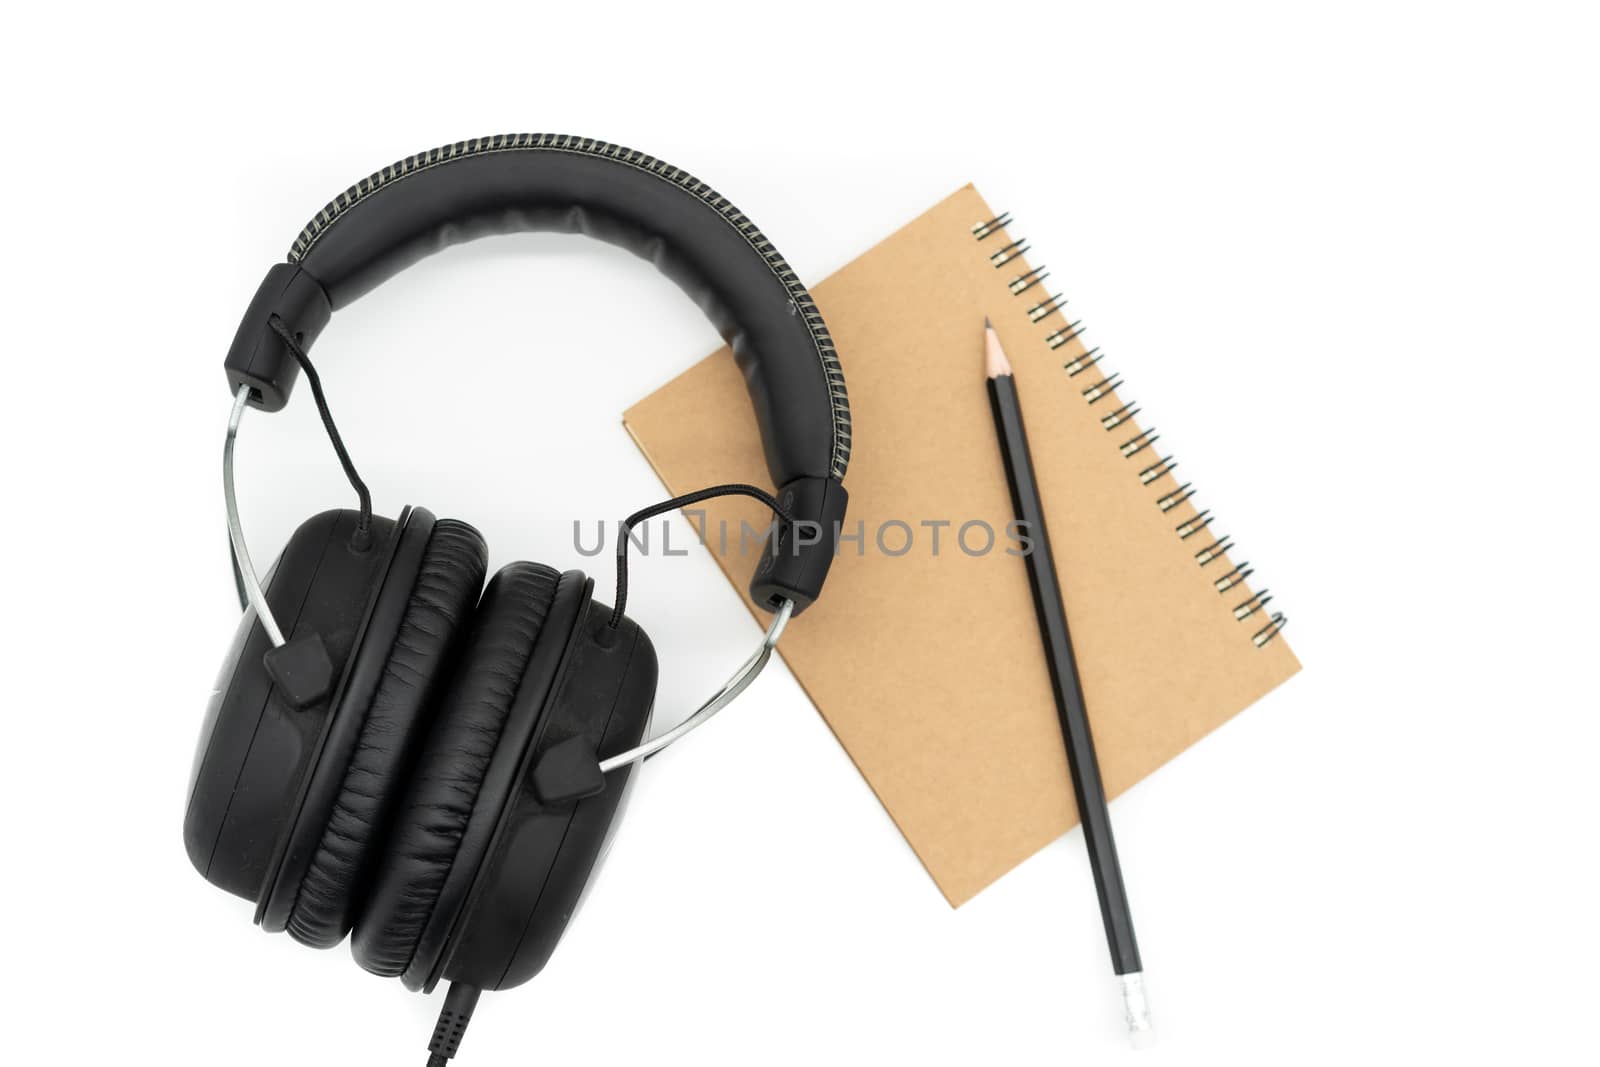 Brown books are placed under a black pencil and all black headphones are on a white background.